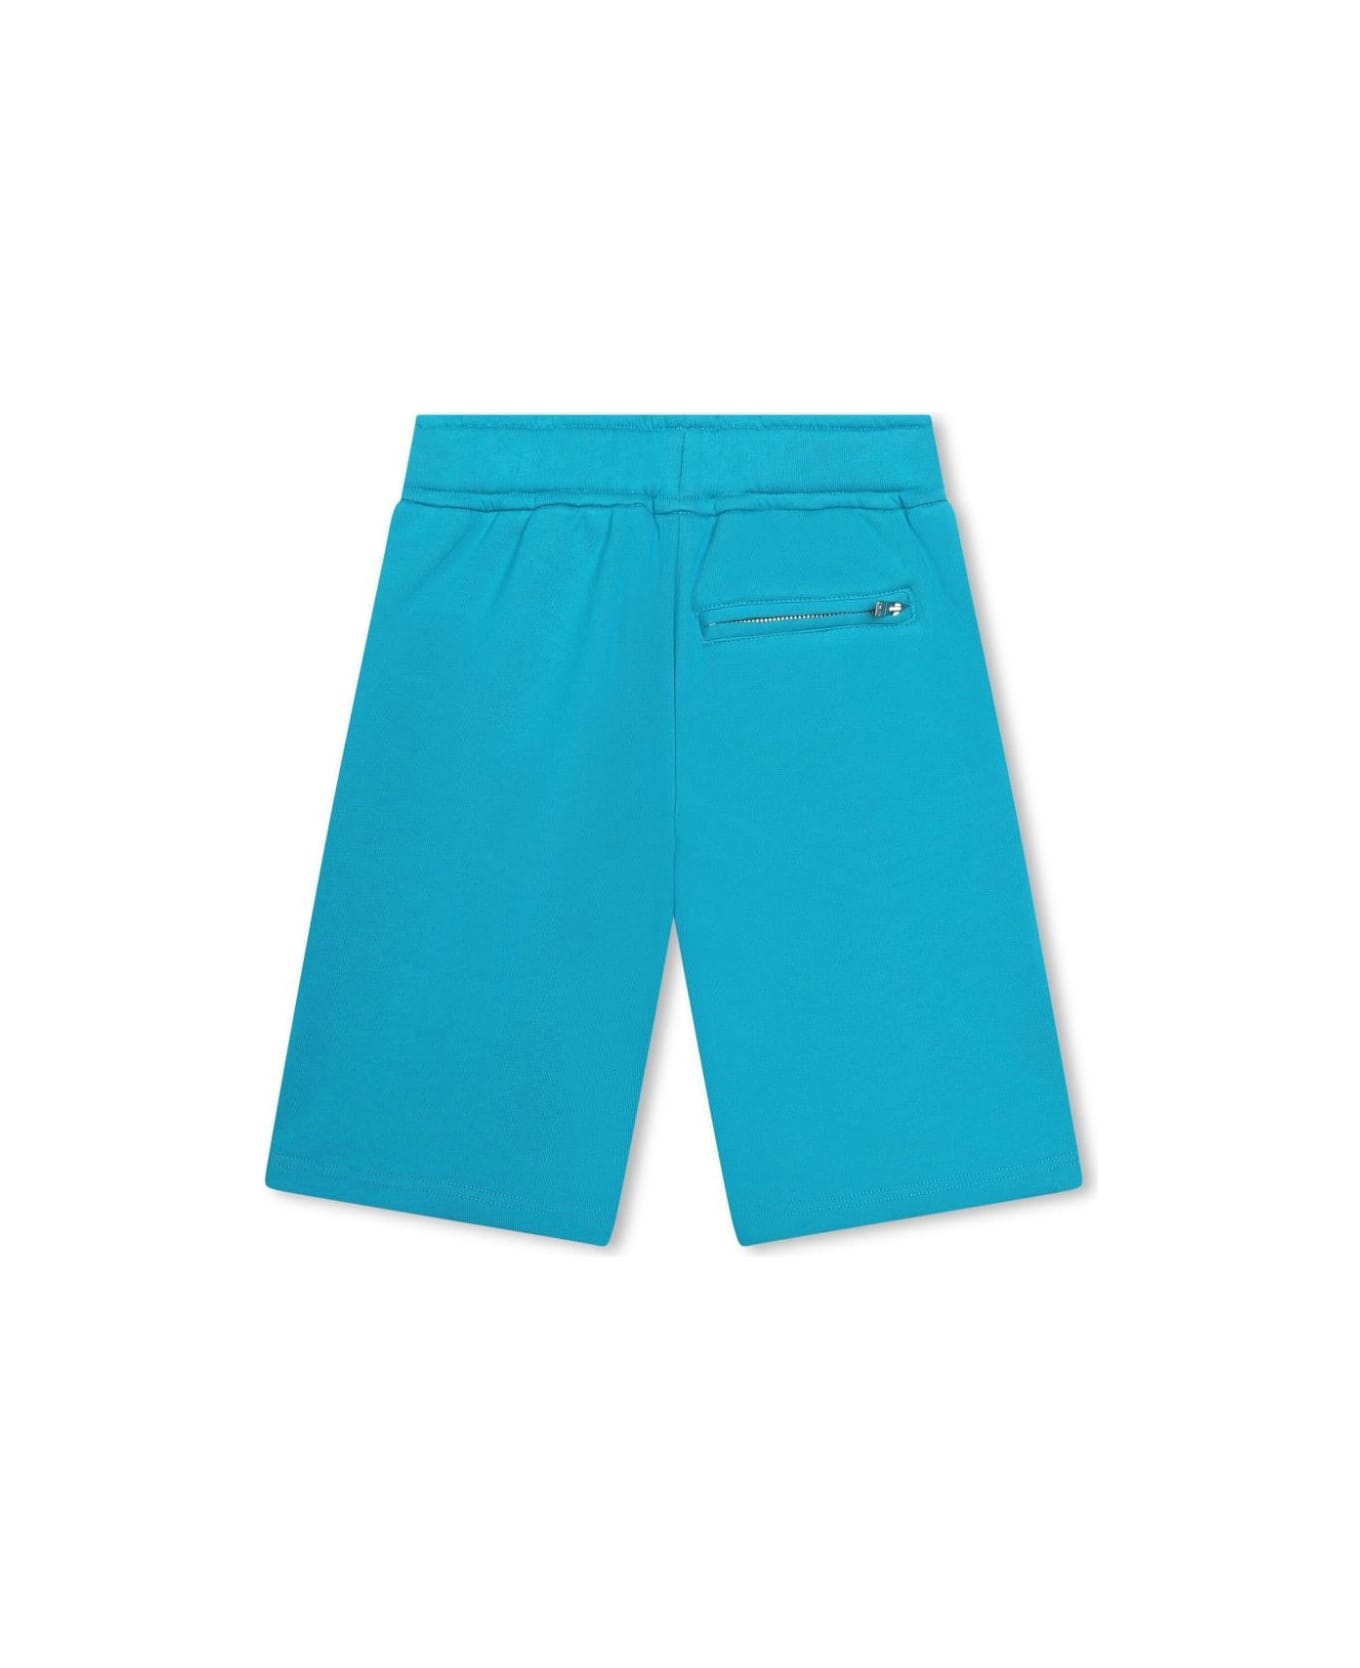 Lanvin Turquoise Shorts With Logo And 'curb' Motif - T Turchese ボトムス